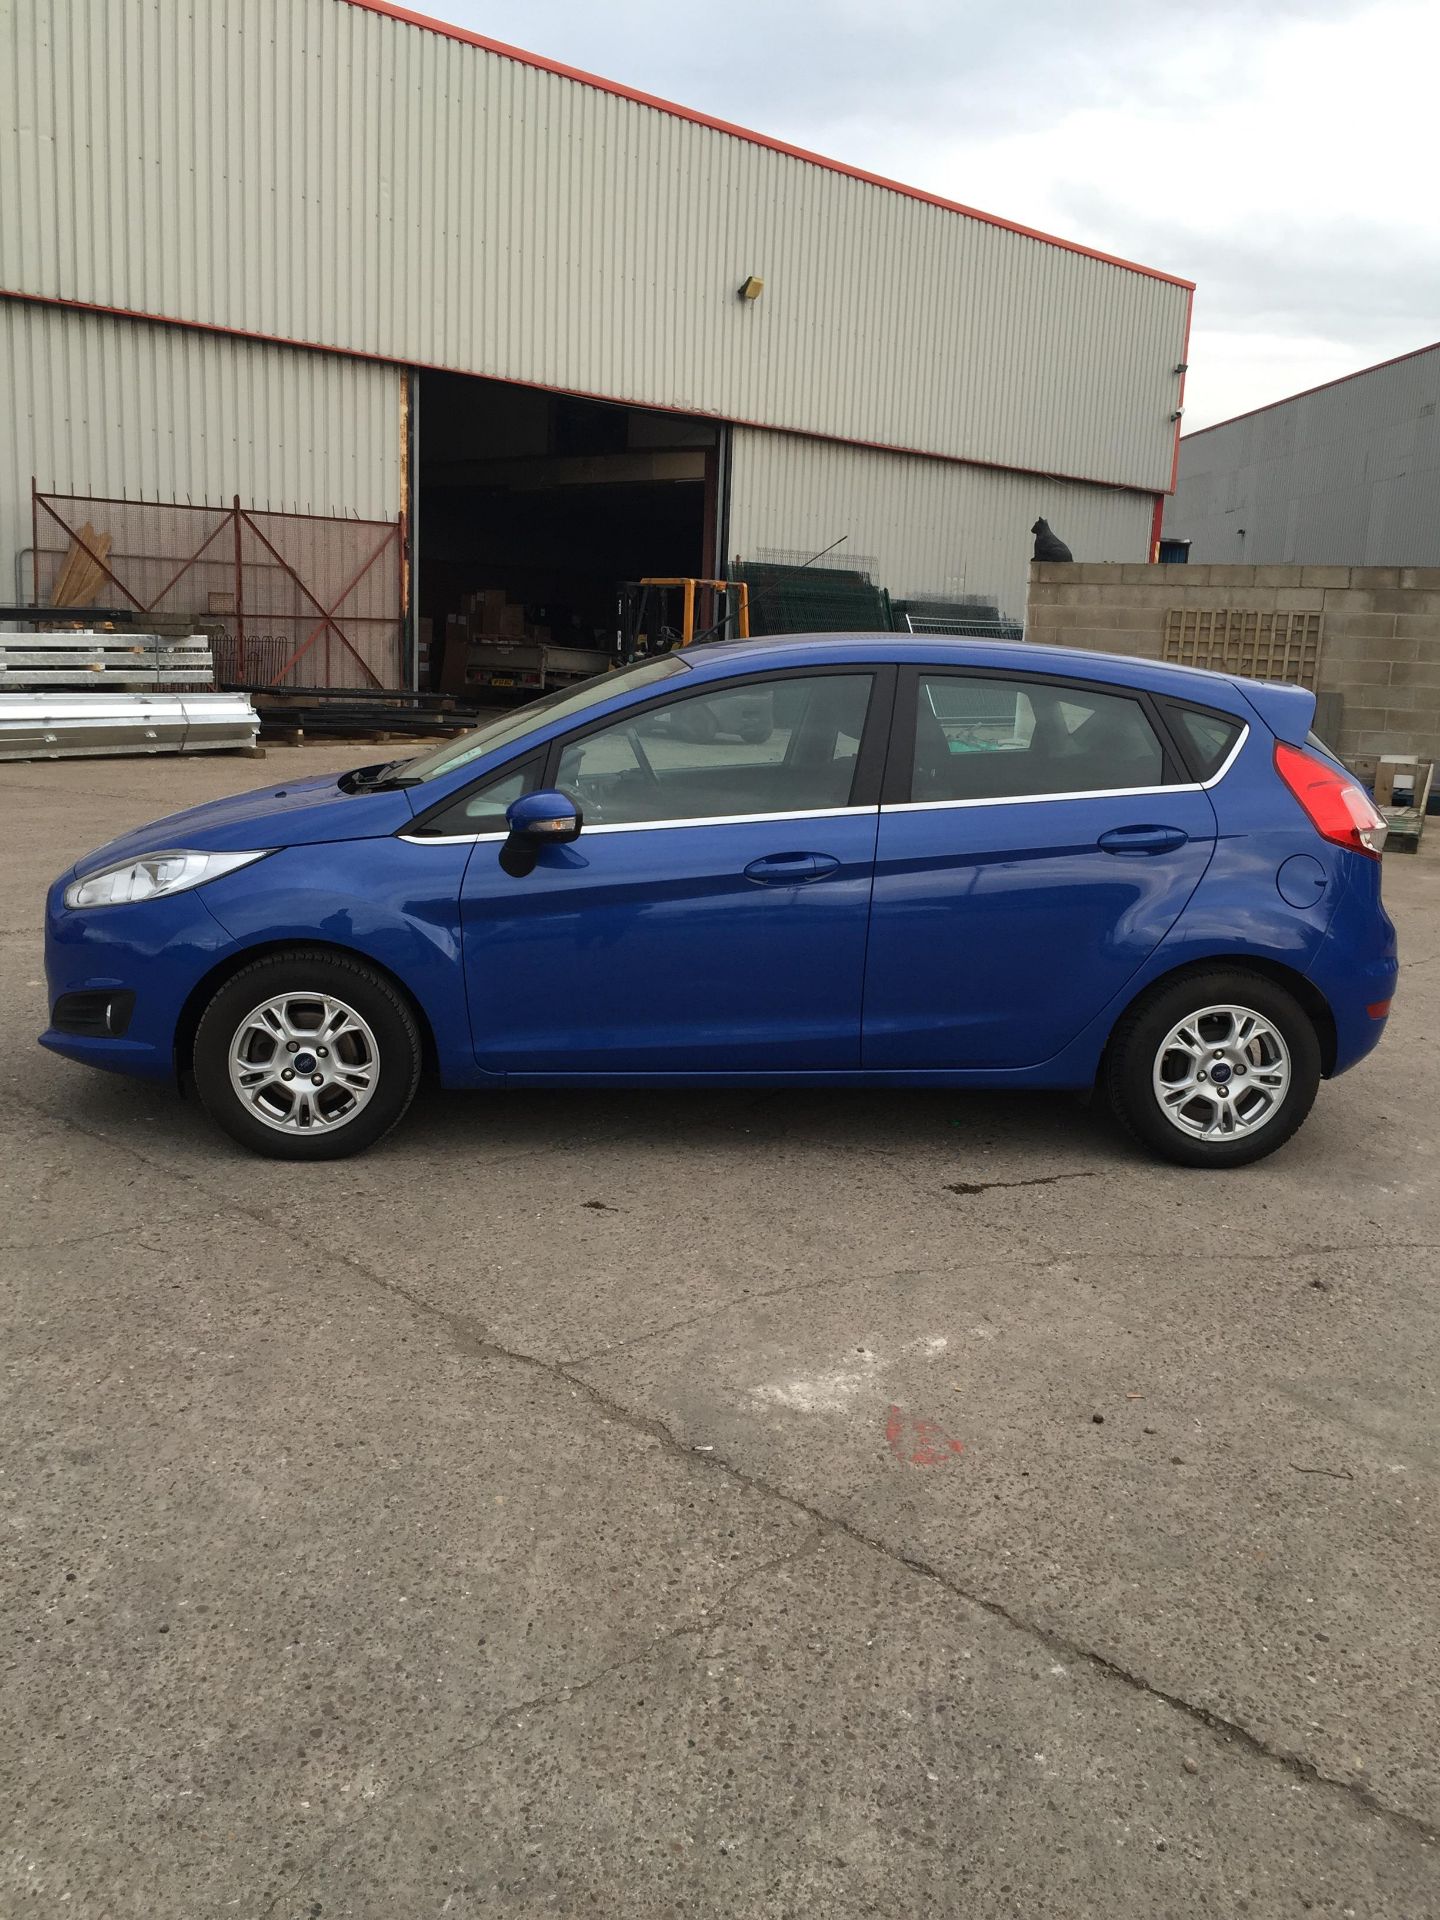 13 Plate FORD FIESTA ZETEC Econetic TDCI - YP13 NRY - Blue - 5 door hatchback - Tax expired 1st Feb - Image 16 of 17